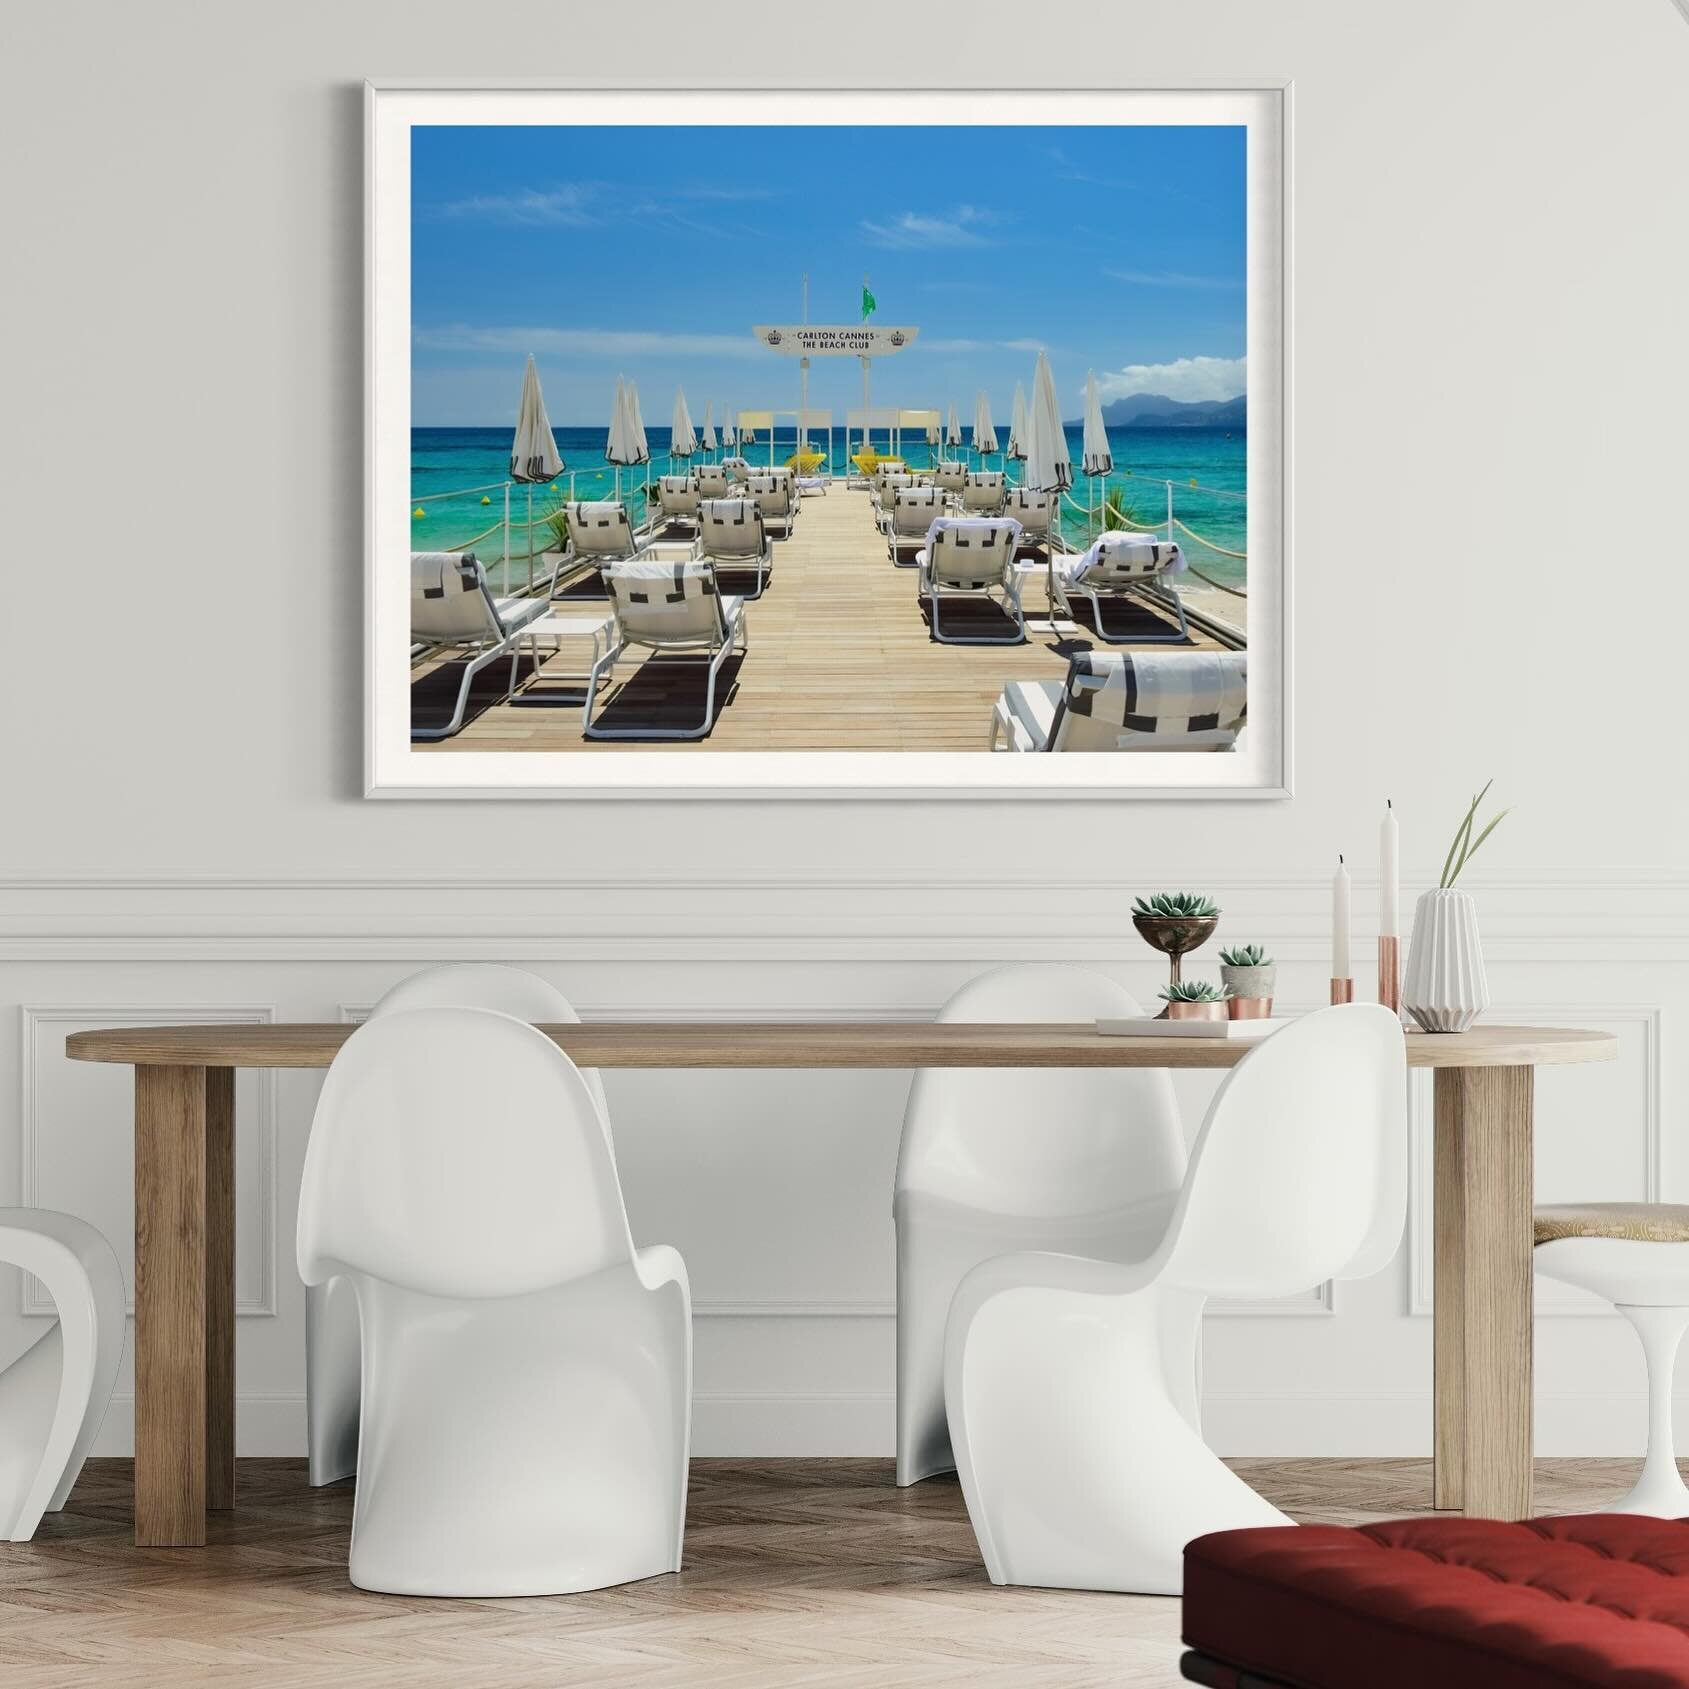 The Beach Club, Carlton Cannes.

Now available in all of the usual sizes. Head over to the website for more information - #linkinbio

#cannes #carltonbeachclub #icon #legend #summer #art #artist #photography #photo #antibes #superyacht #juanlespins #